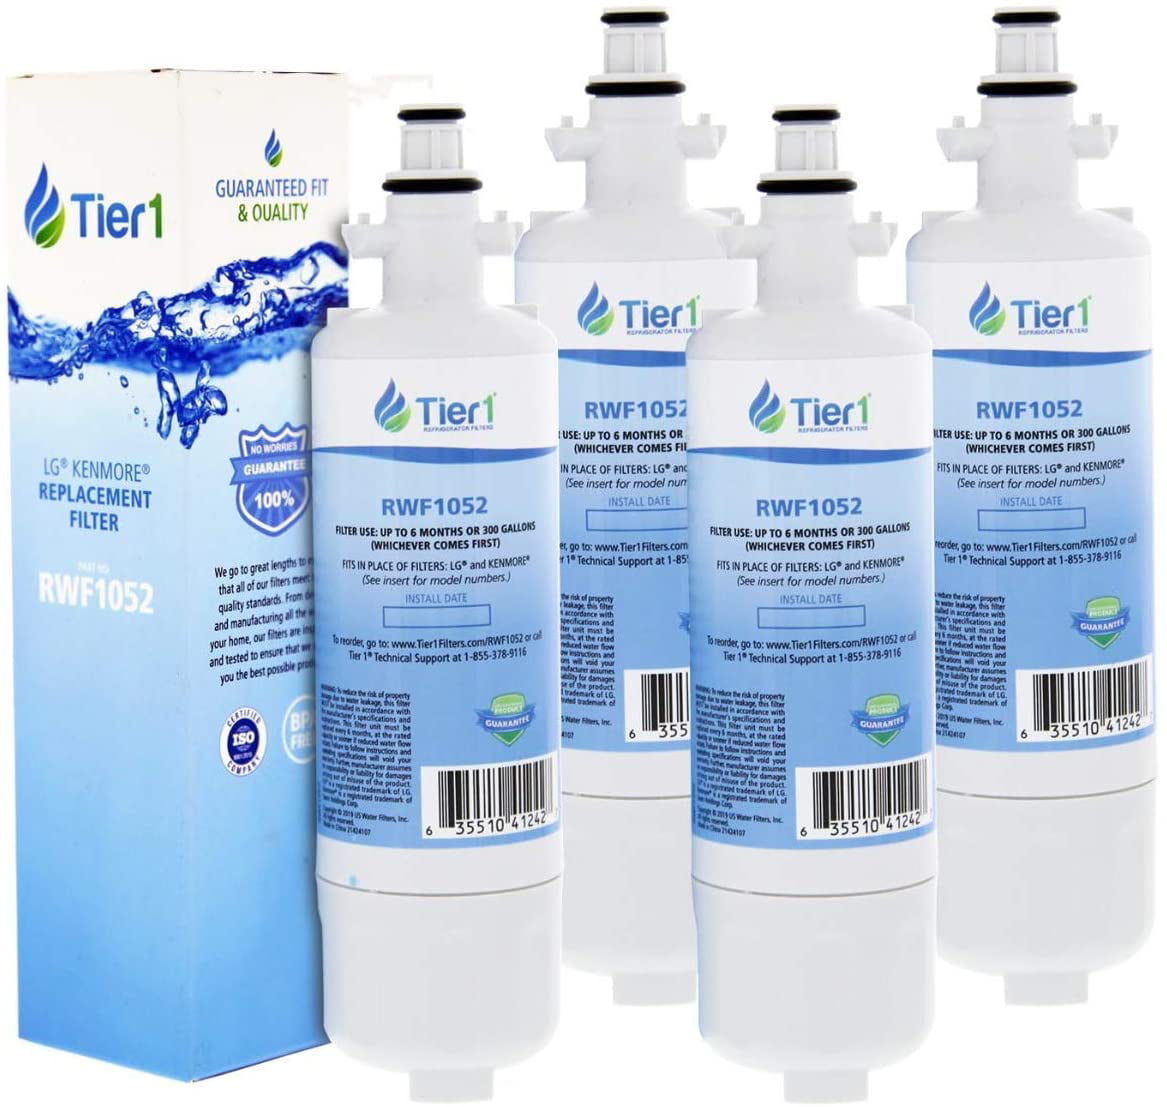 Fits LG LT800P Tier1 Comparable Refrigerator Water Filter and Garbage Disposal